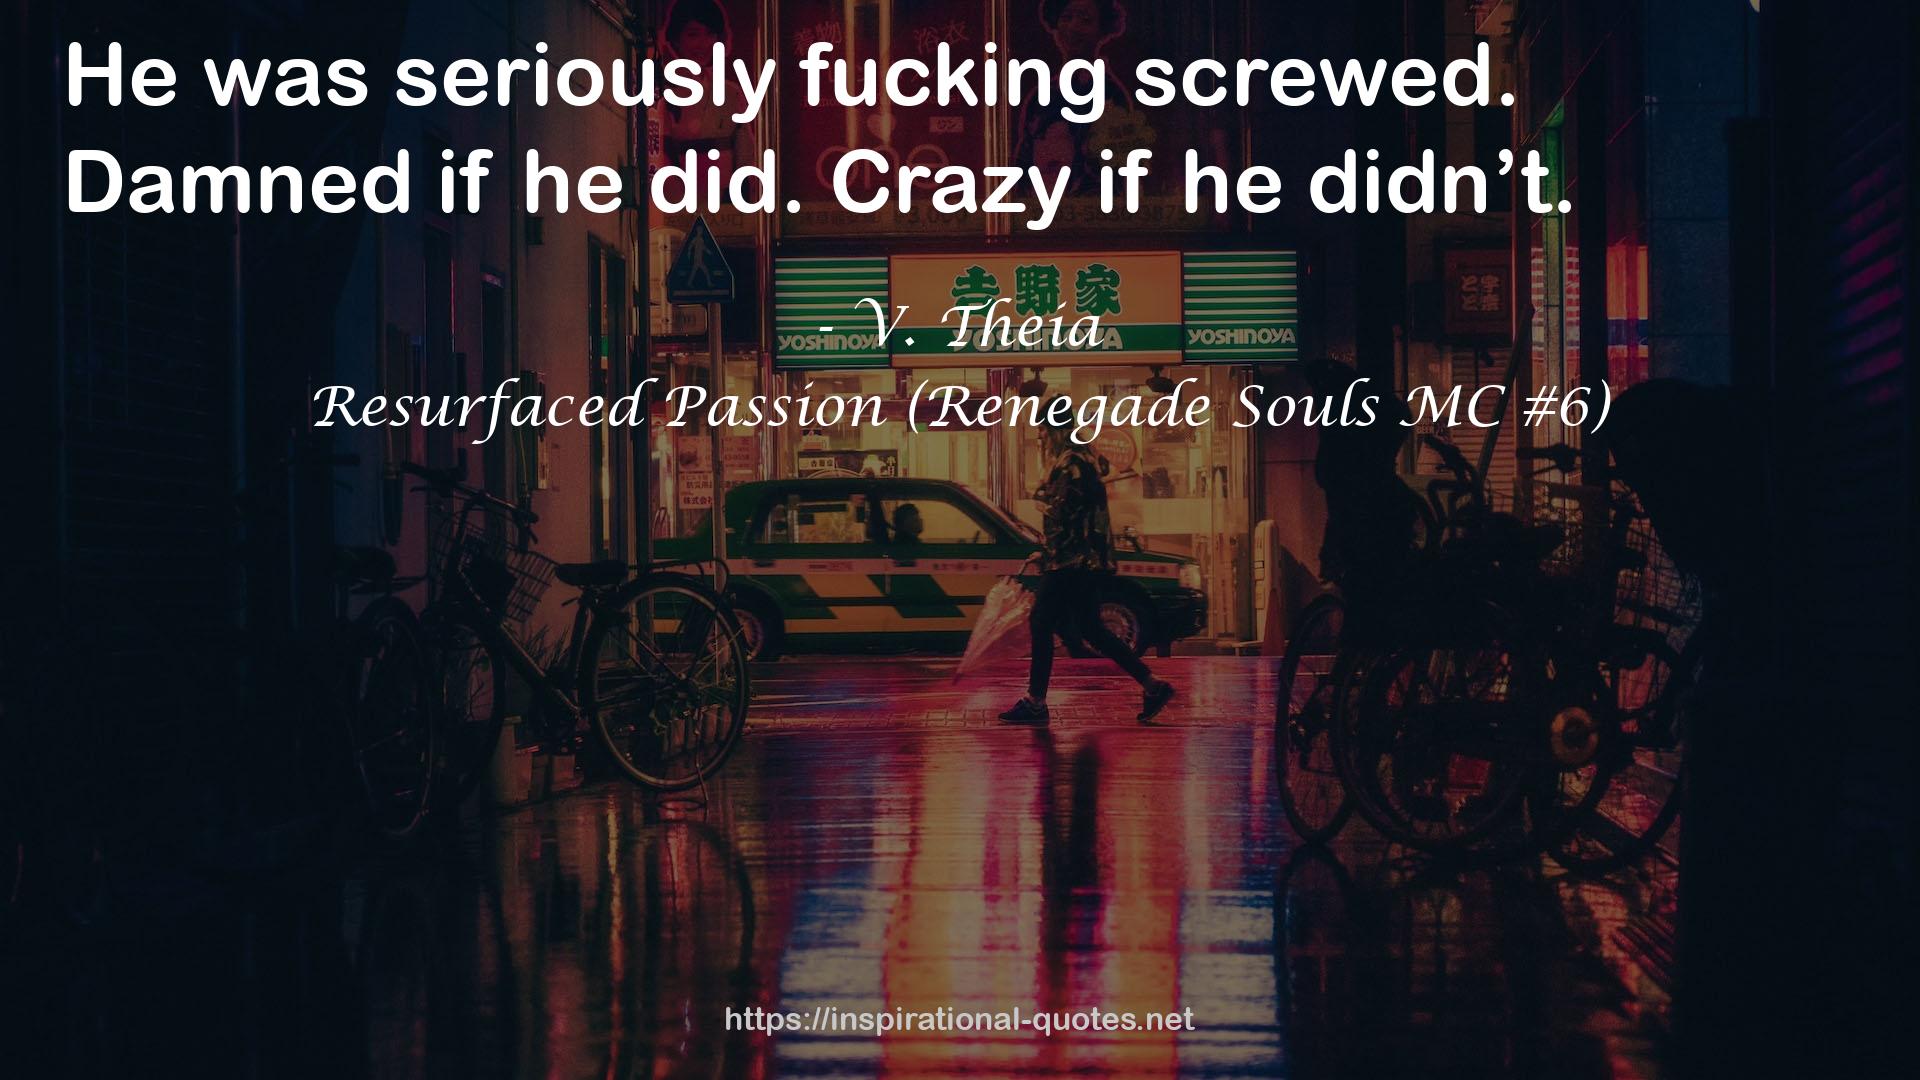 Resurfaced Passion (Renegade Souls MC #6) QUOTES